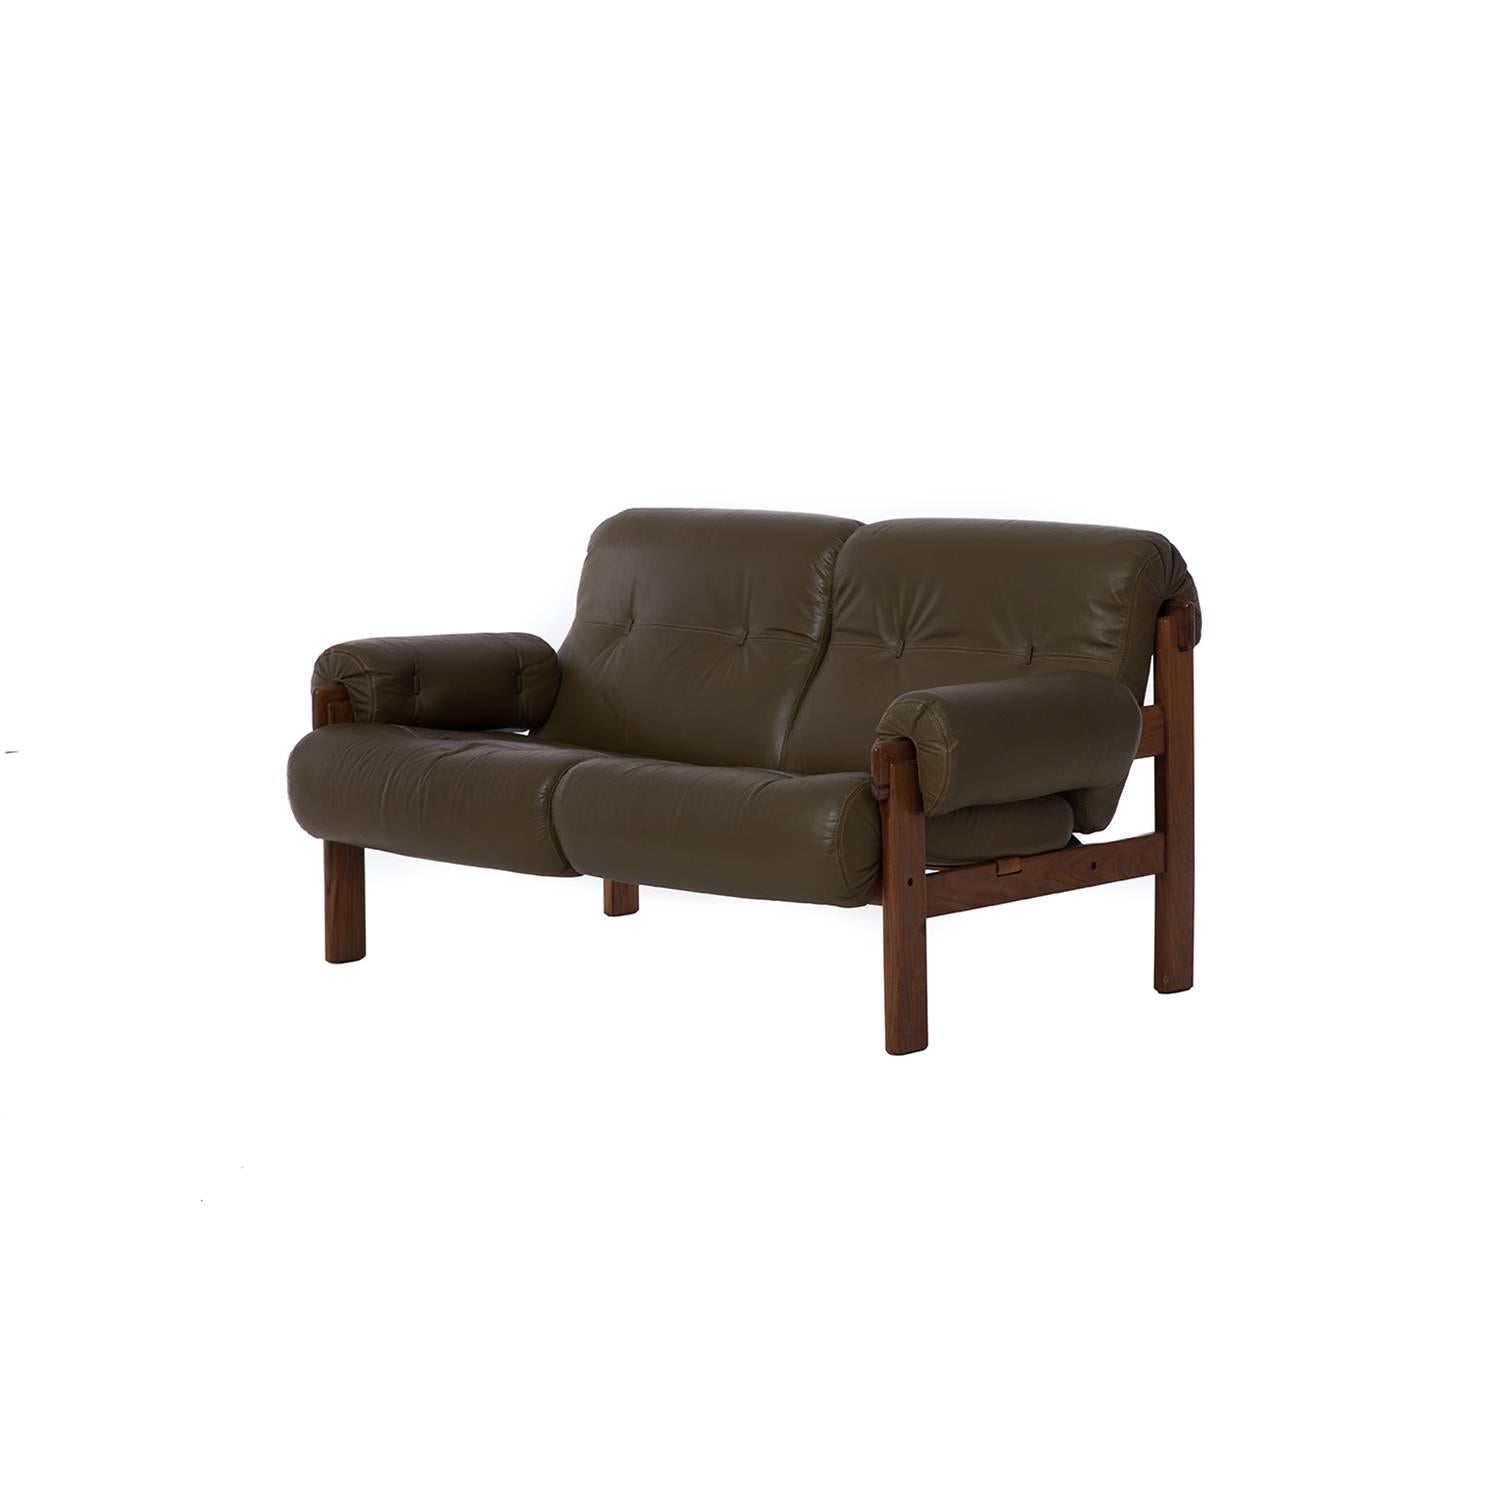 This Brazilian modern settee from the 1970s boasts original leather and leather webbing in excellent condition.

Professional, skilled furniture restoration is an integral part of what we do every
day. Our goal is to provide beautiful, functional